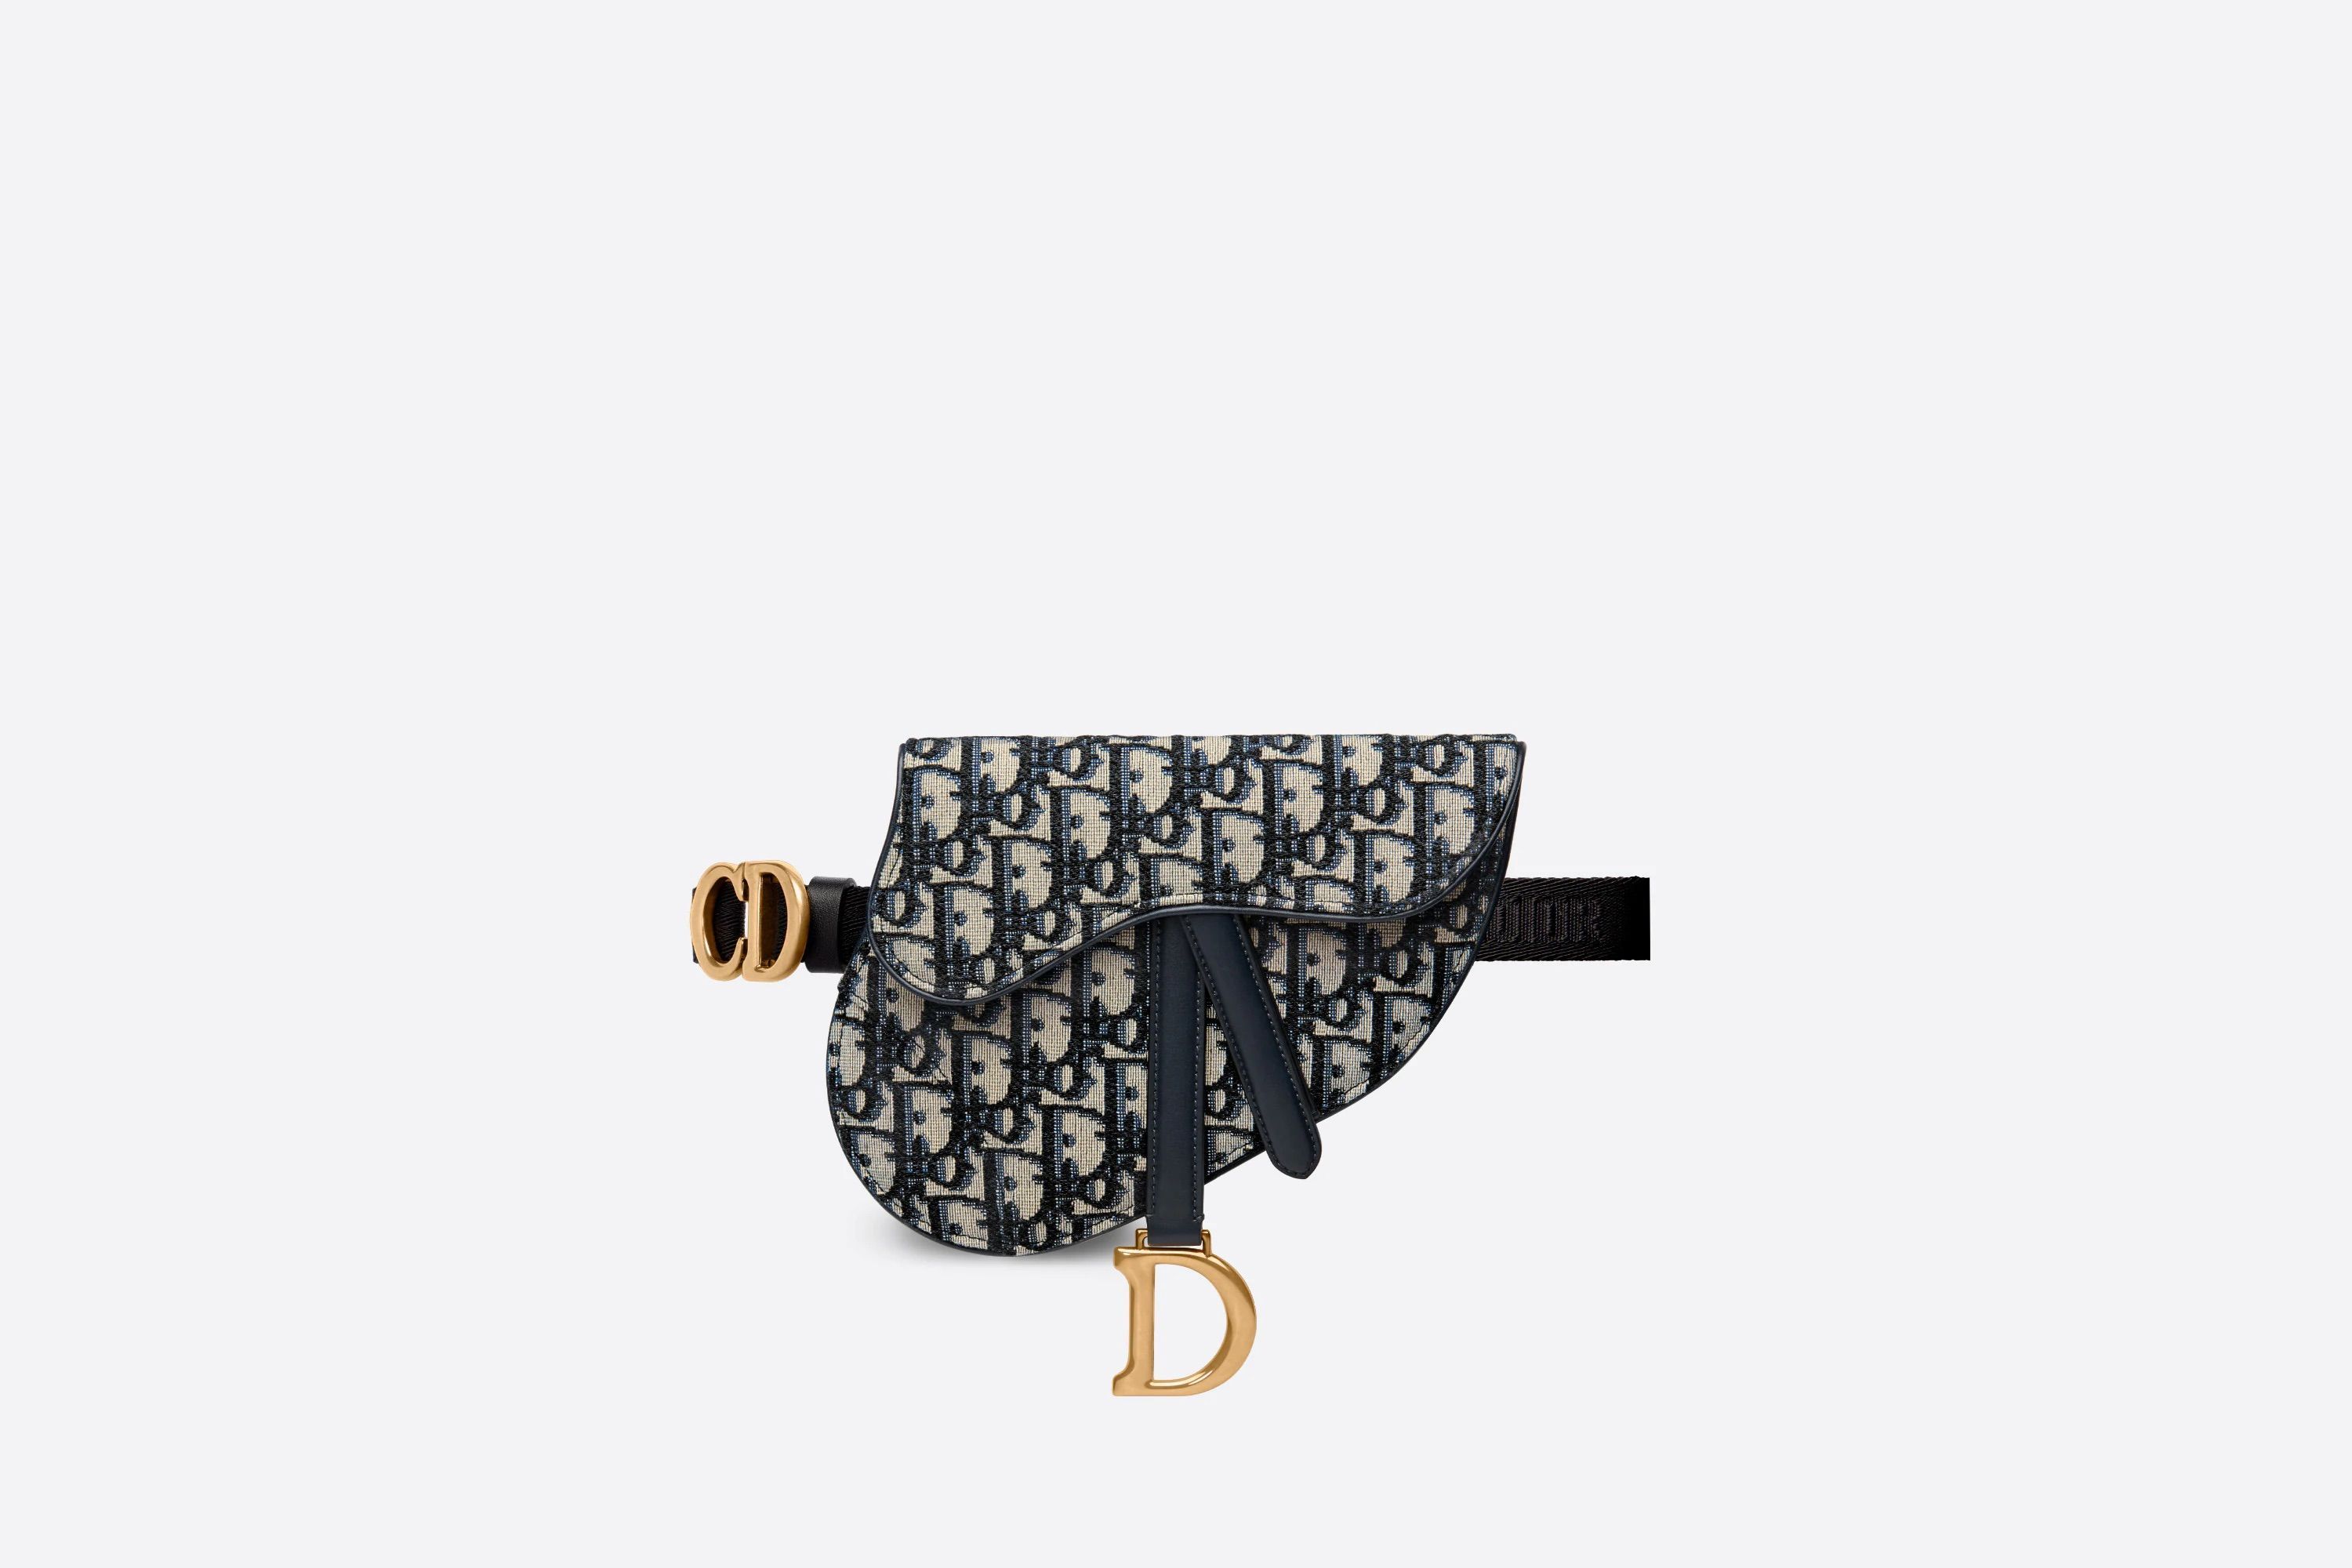 <p><strong>$2000.00</strong></p><p>The Saddle bag from Dior was <em>the</em> It-bag of the early 2000s, and this belt bag version of it still feels totally modern. The organic pouch shape is hung around an adjustable belt, and trimmed with all the same details as the original bag, such as the front'D' stirrup and 'CD' metal letters. If you are a minimalist, wear as a standalone, statement piece against a neutral palette, or if you want to have a little more fun, mix and match with a brighter ensemble. </p><p><strong>Size:</strong> 8 x 6.5 x 1 inches</p><p><strong>Material:</strong> Jacquard, Leather </p><p><strong>Color:</strong> Blue Dior Oblique Jacquard</p>